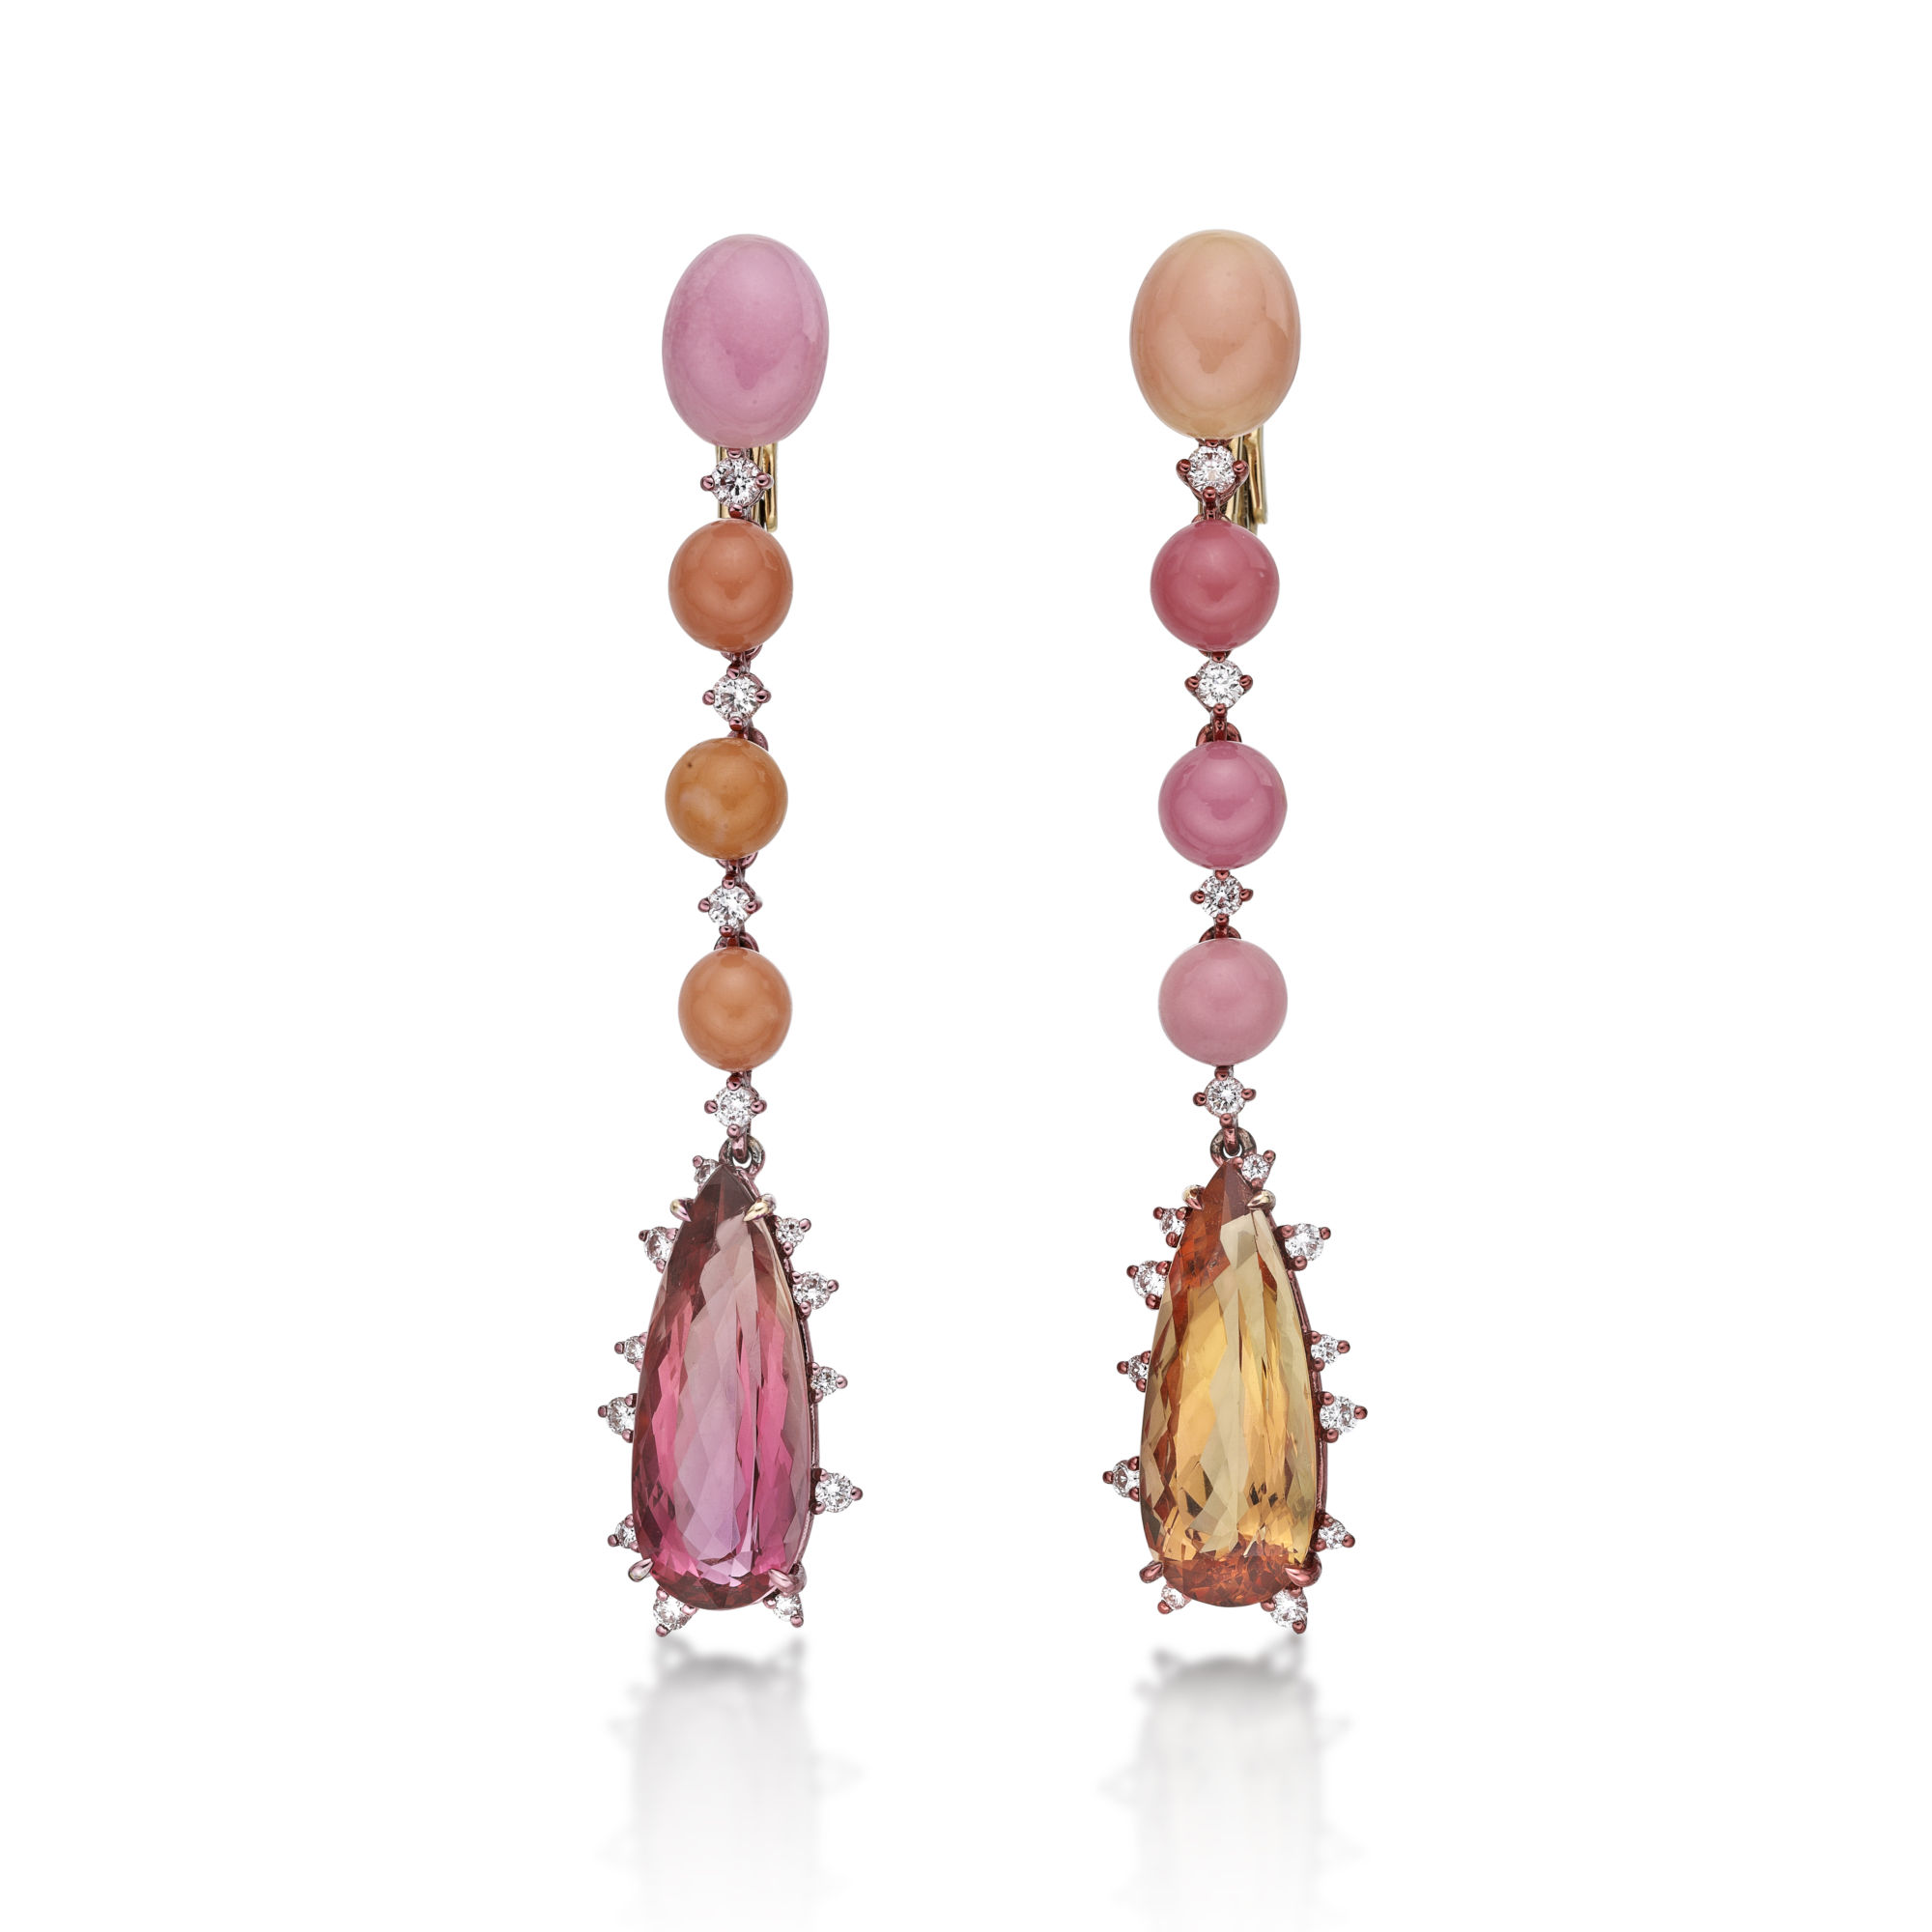 Full Circle imperial Topaz earrings, 18ct rose gold with rosa and salmone plating, pink and orange conch pearls and imperial topaz Sarah Ho